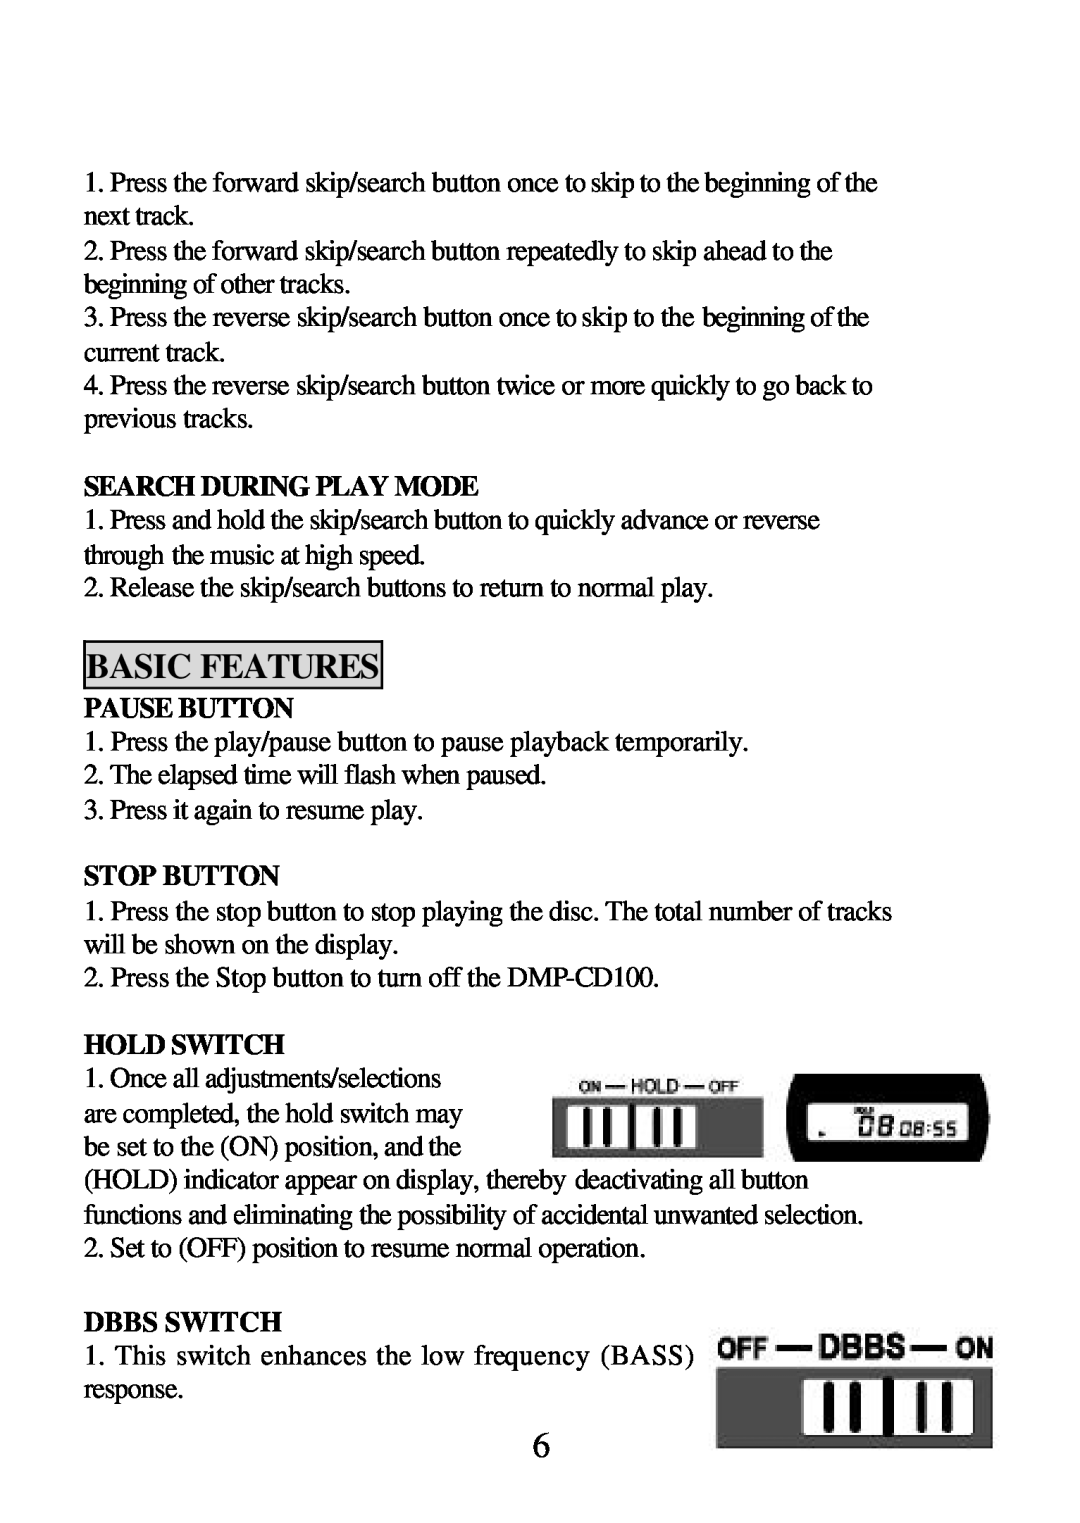 D-Link DMP-CD100 user manual Basic Features, Search During Play Mode, Pause Button, Stop Button, Hold Switch, Dbbs Switch 